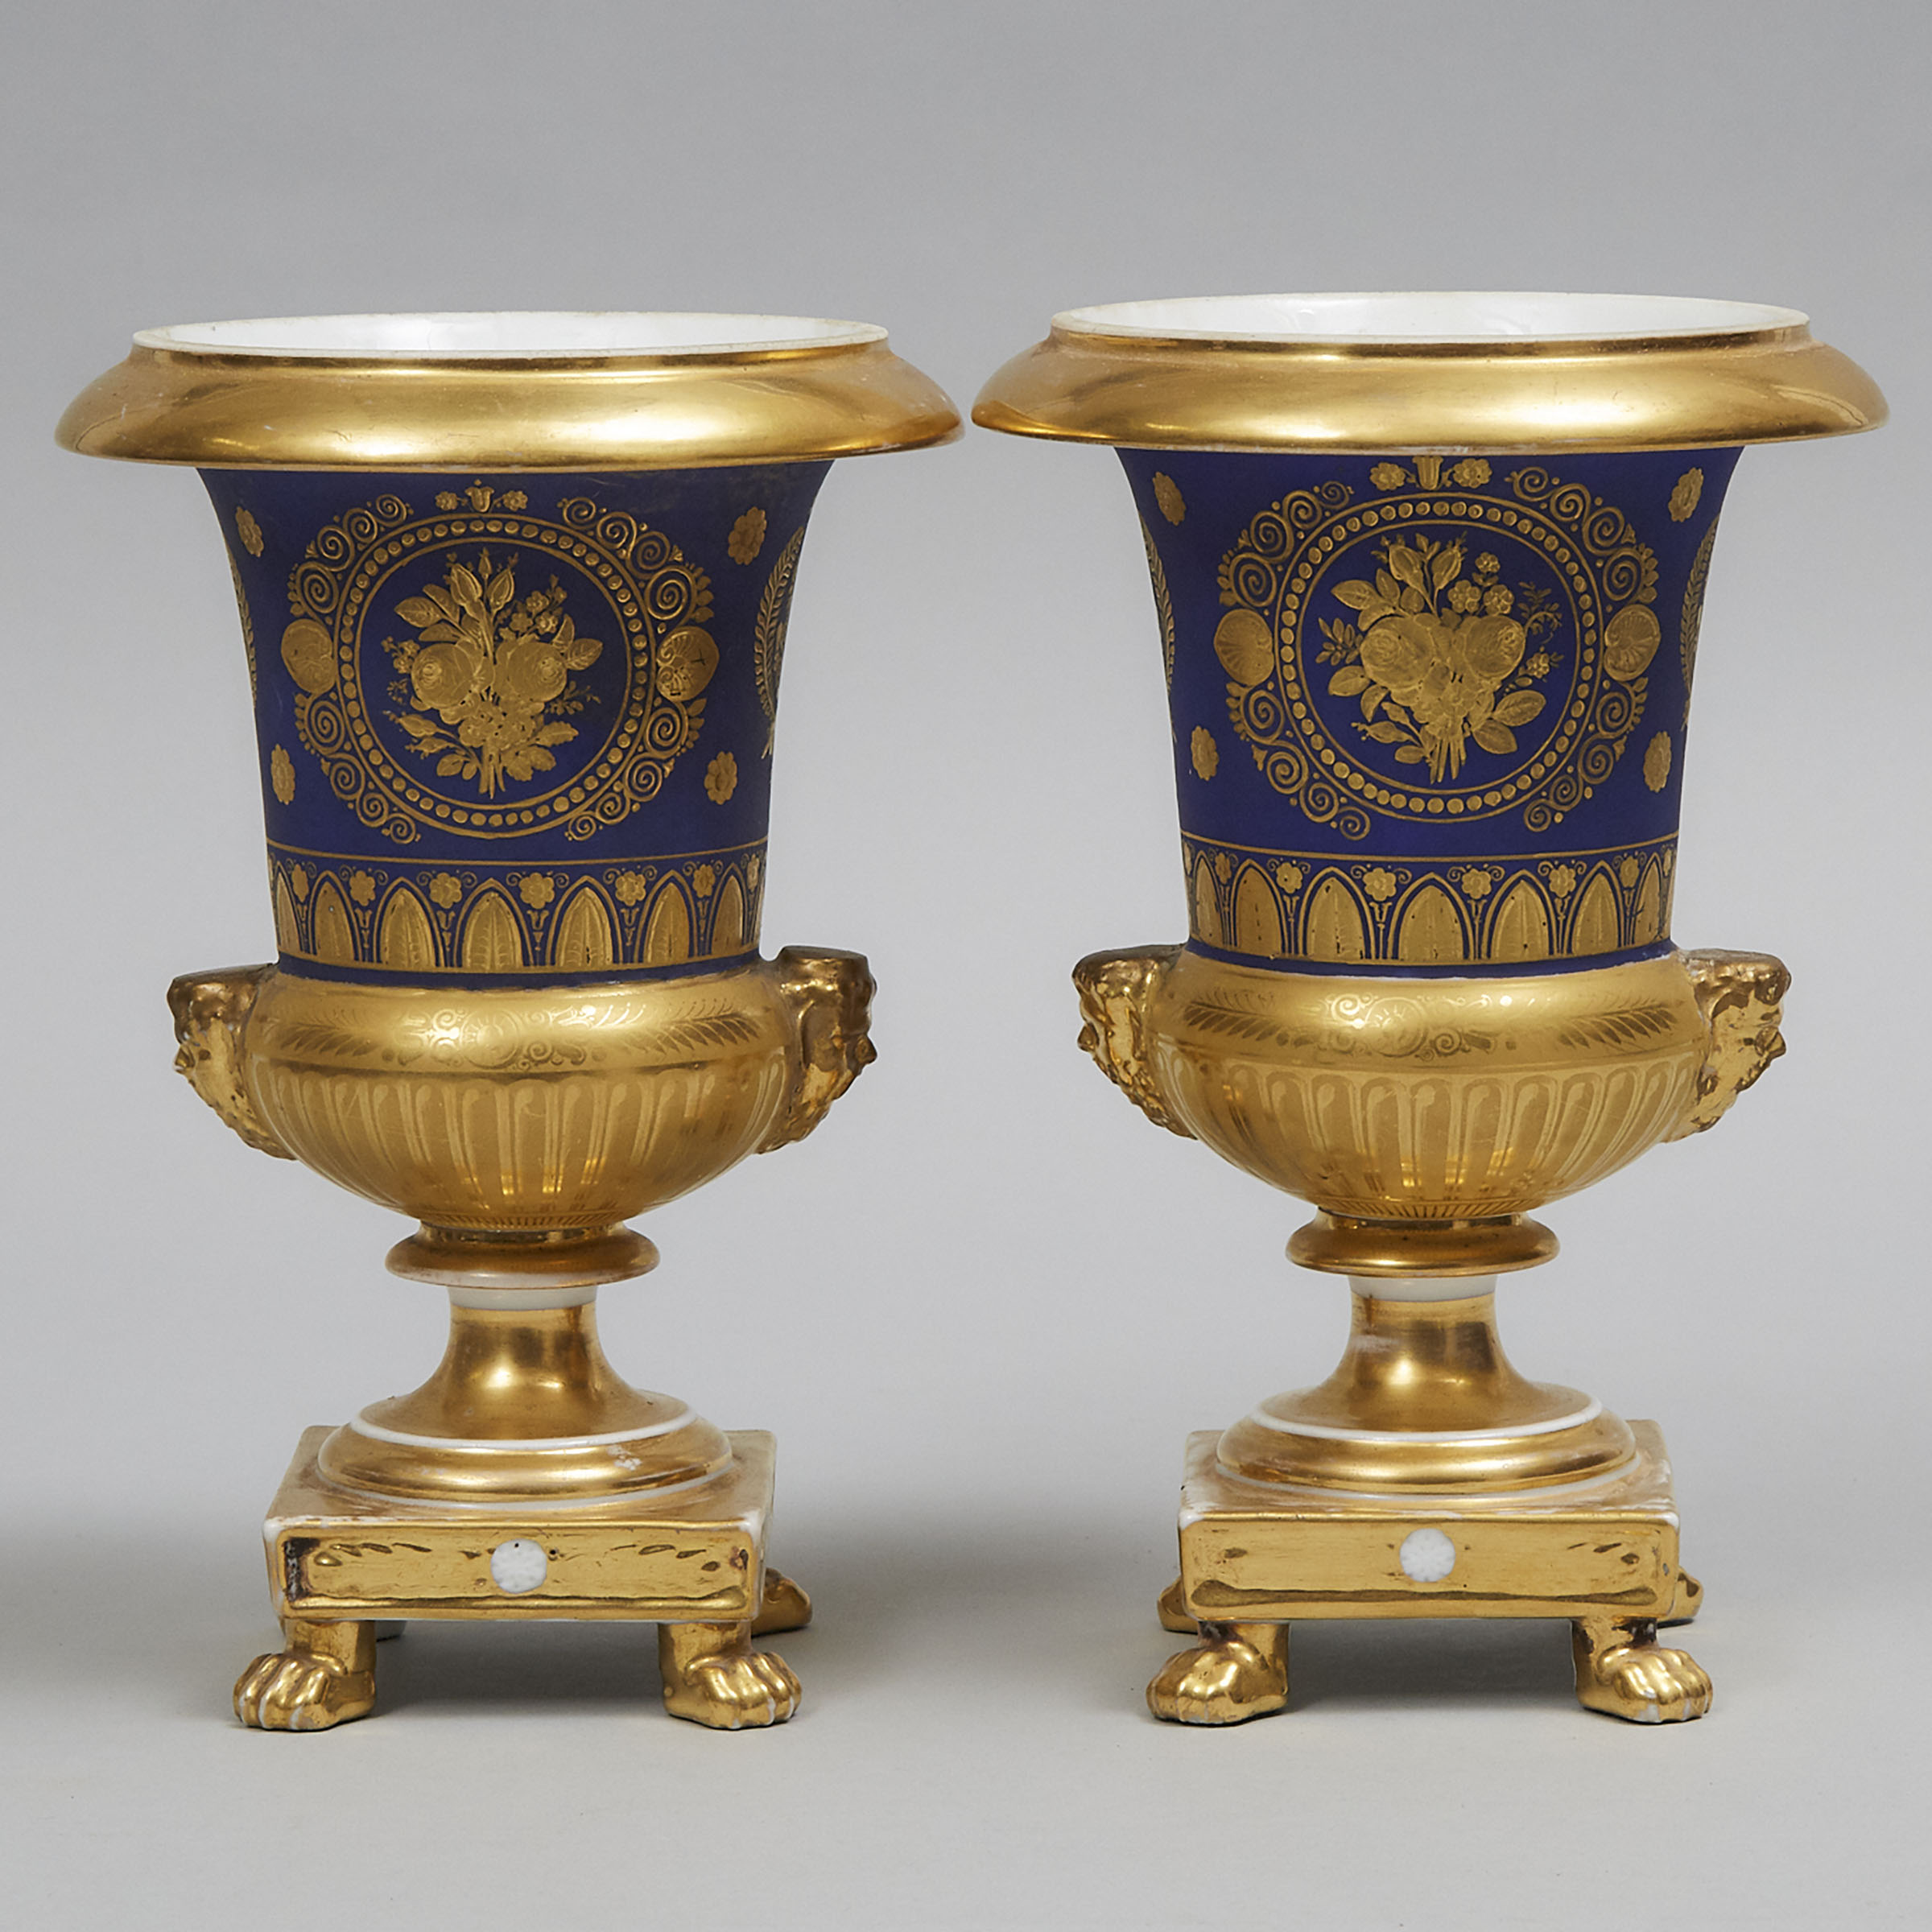 Pair of French Porcelain Empire Style Vases, 19th century